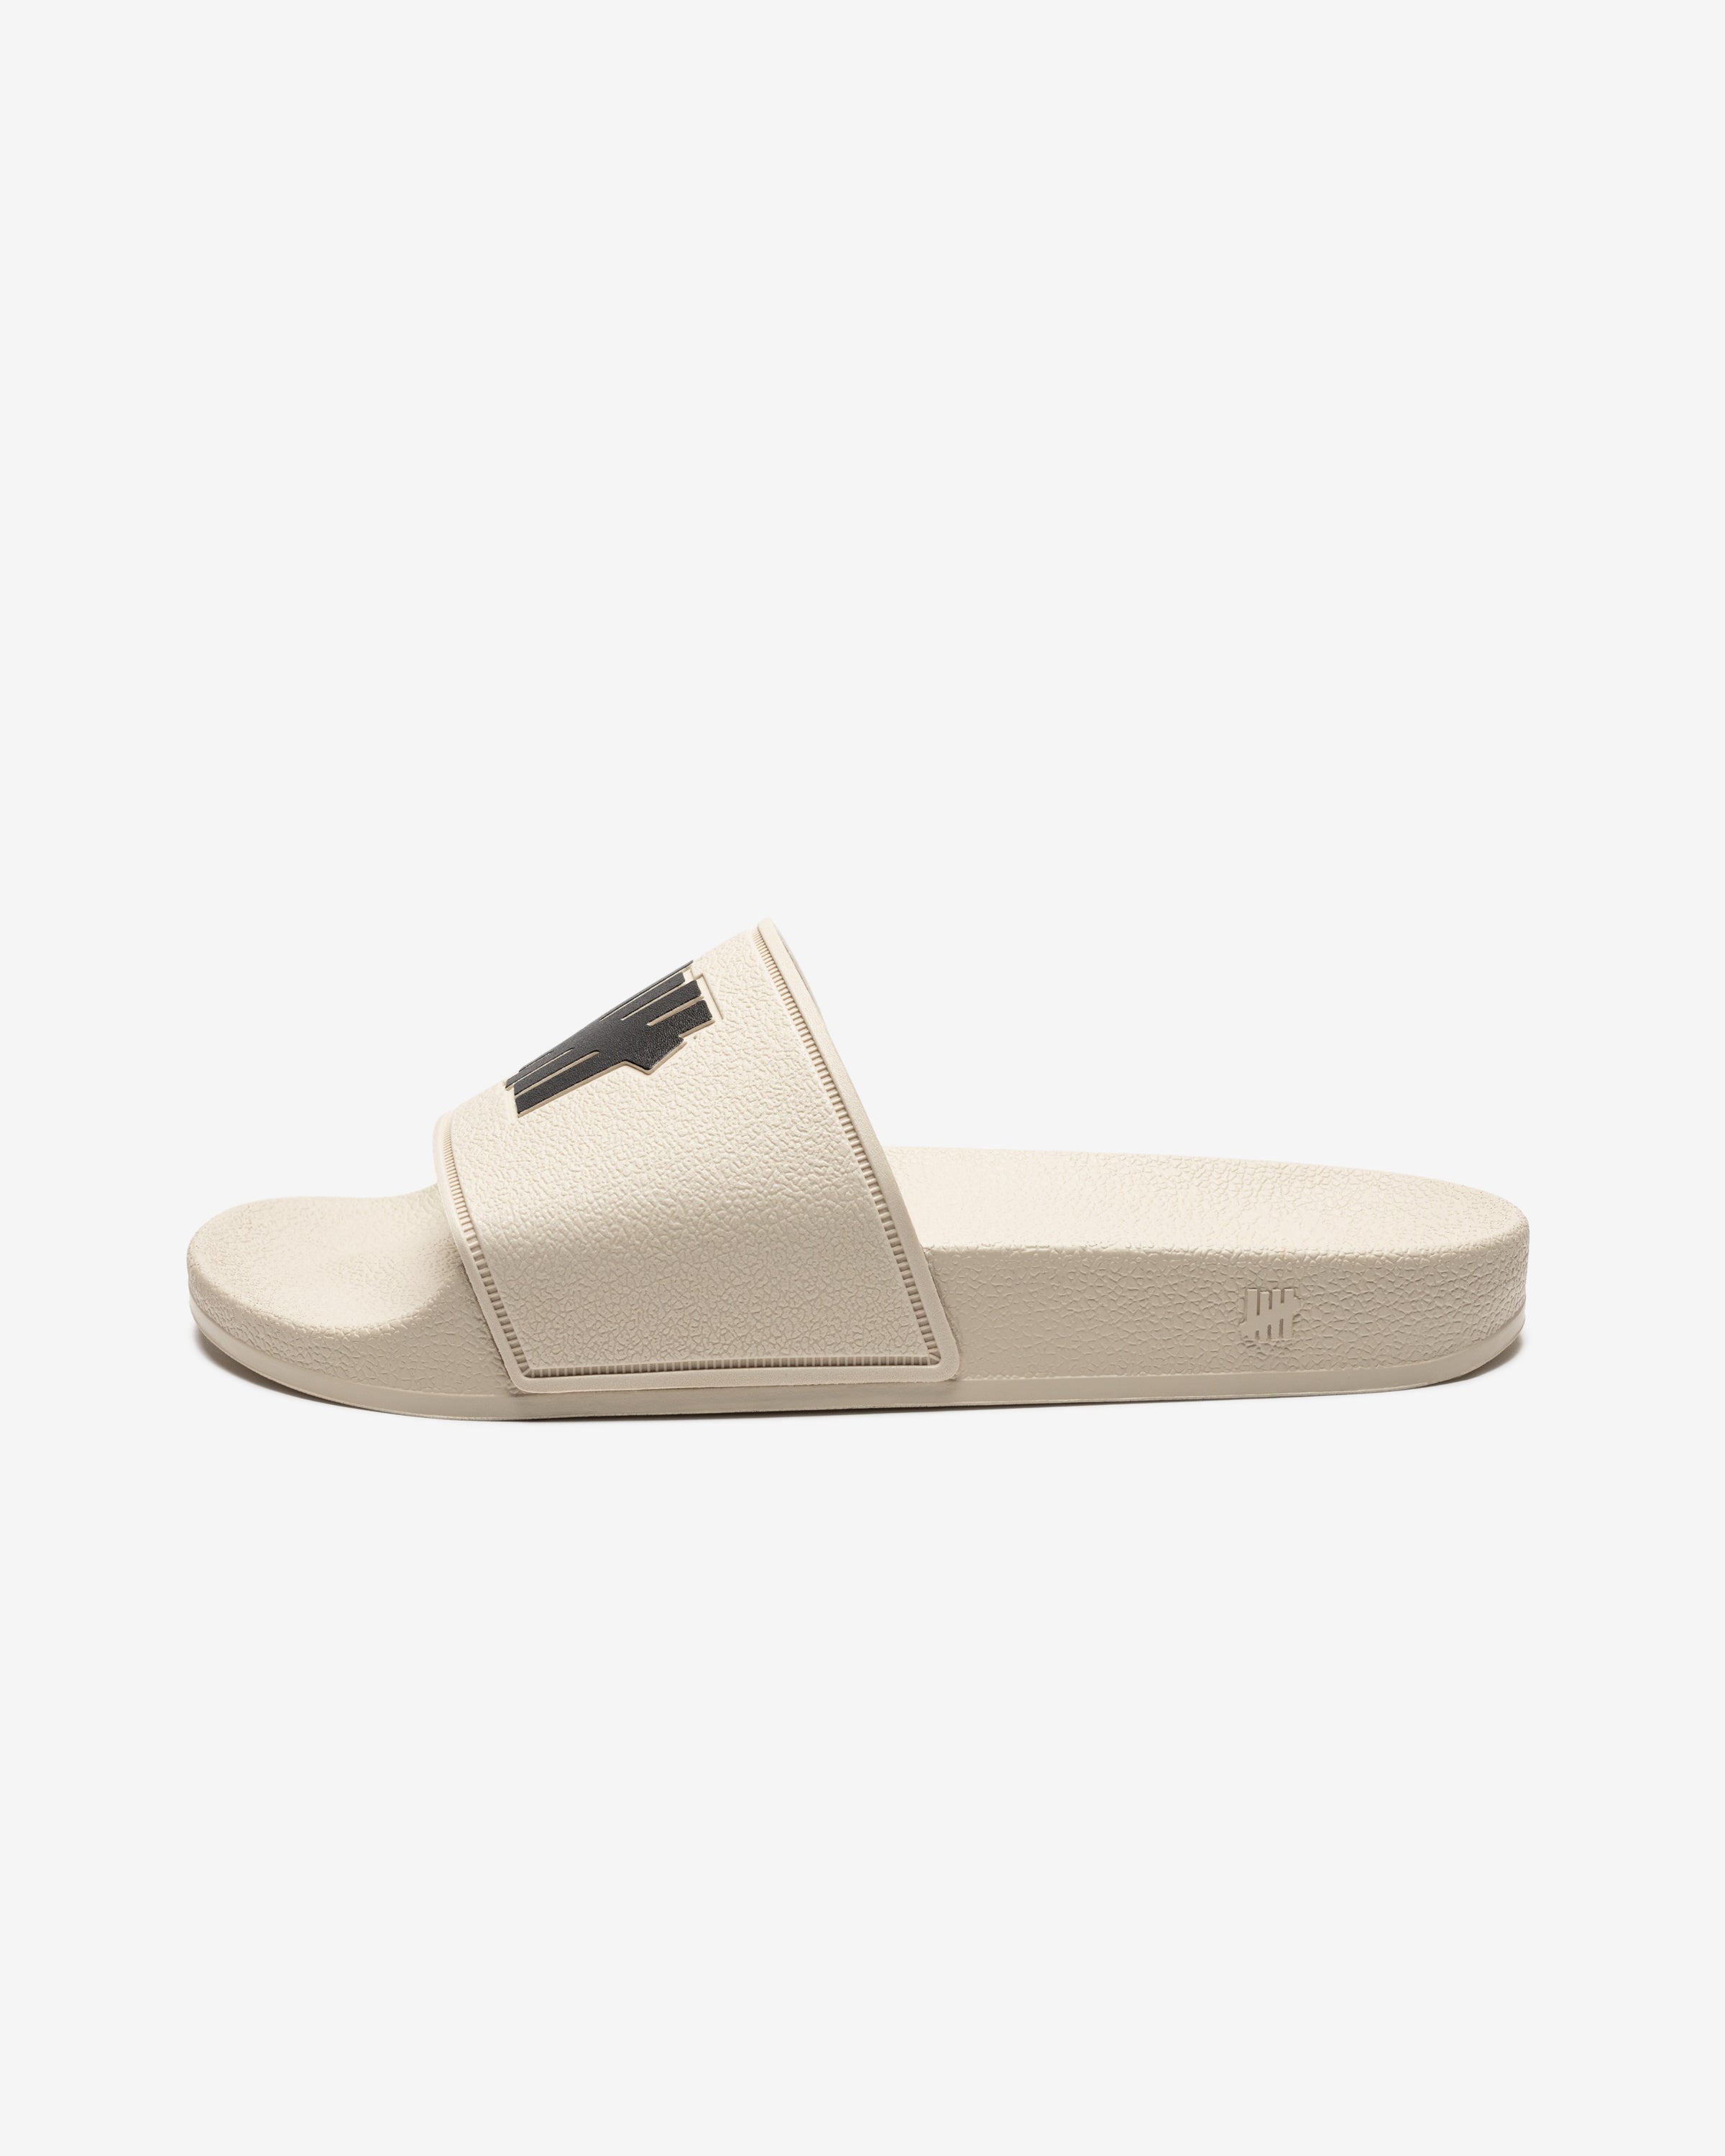 UNDEFEATED ICON CLASSIC SLIDE – Undefeated